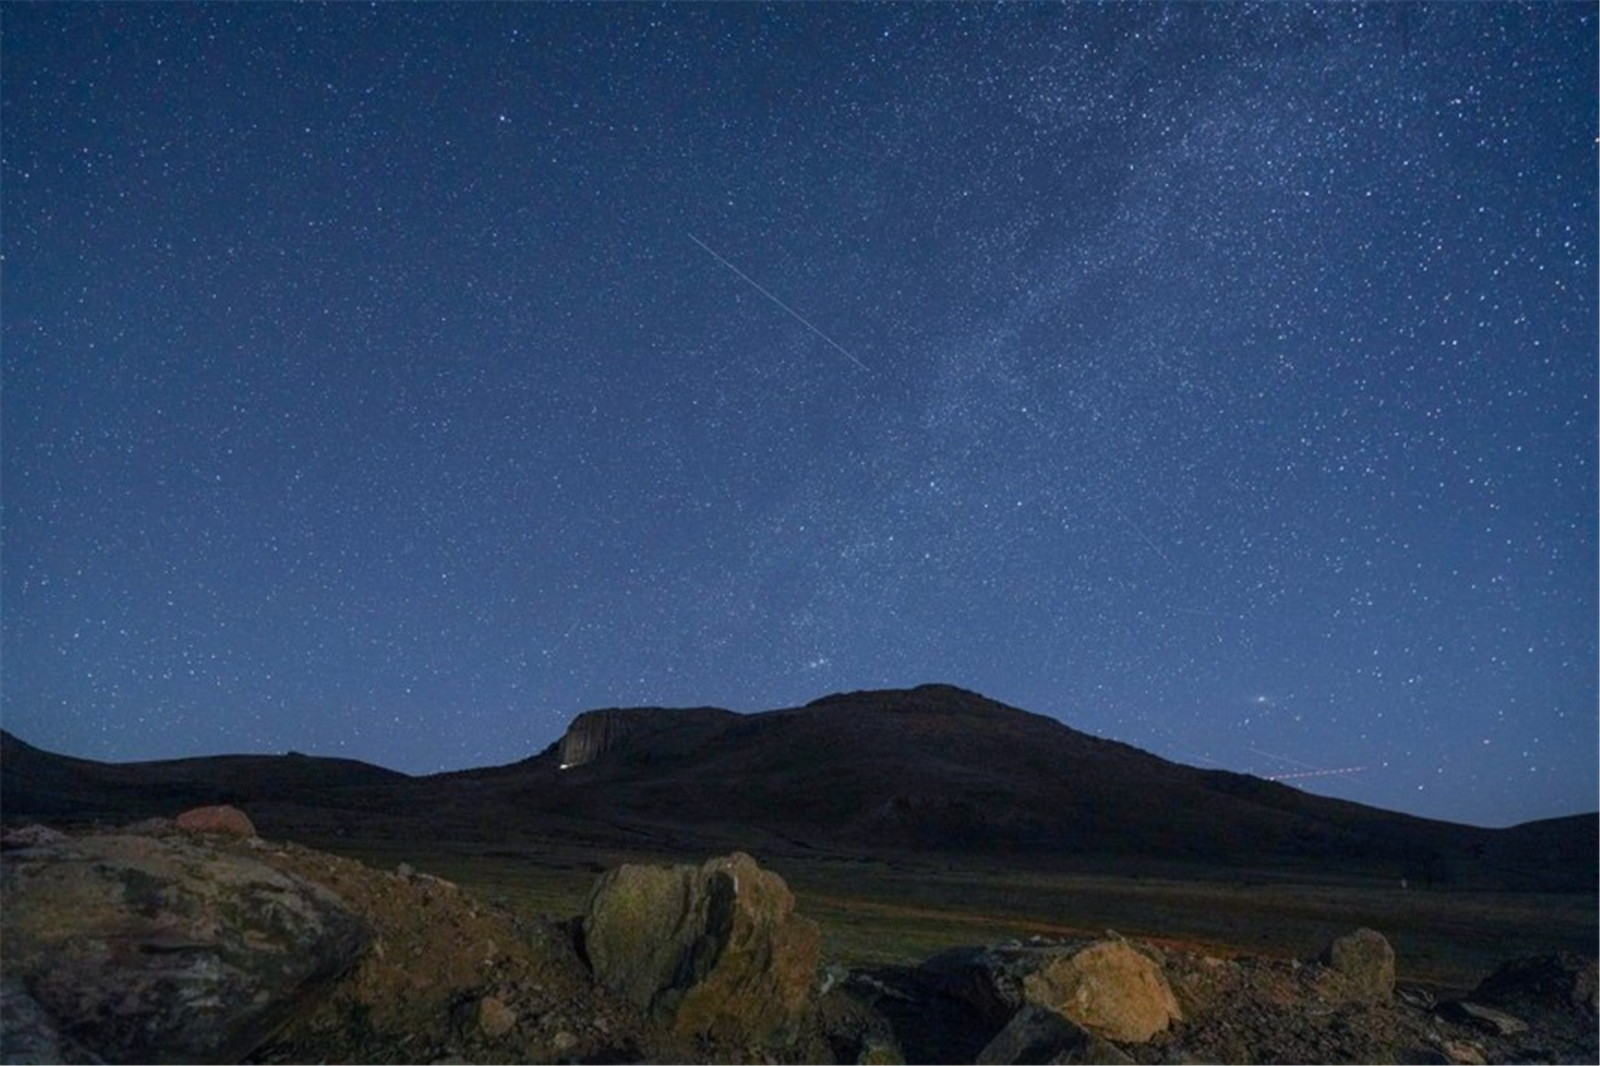 Inner Mongolia's starry sky offers a breathtaking view of numerous constellations